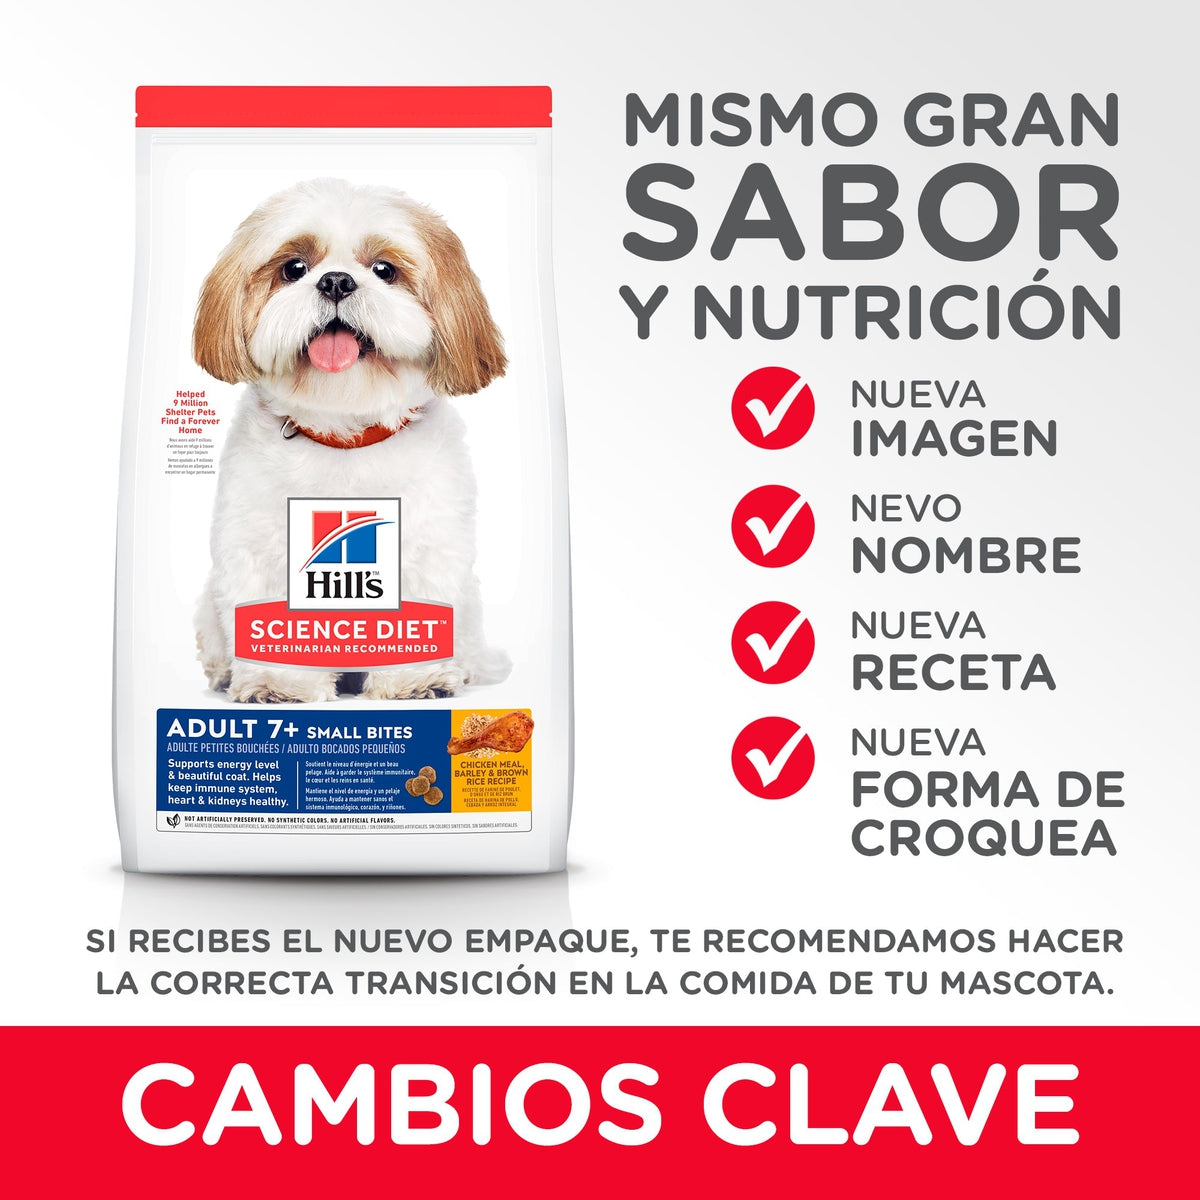 Alimento para Perro Hill's Science Diet Adult 7+ Active Longevity Small Bites